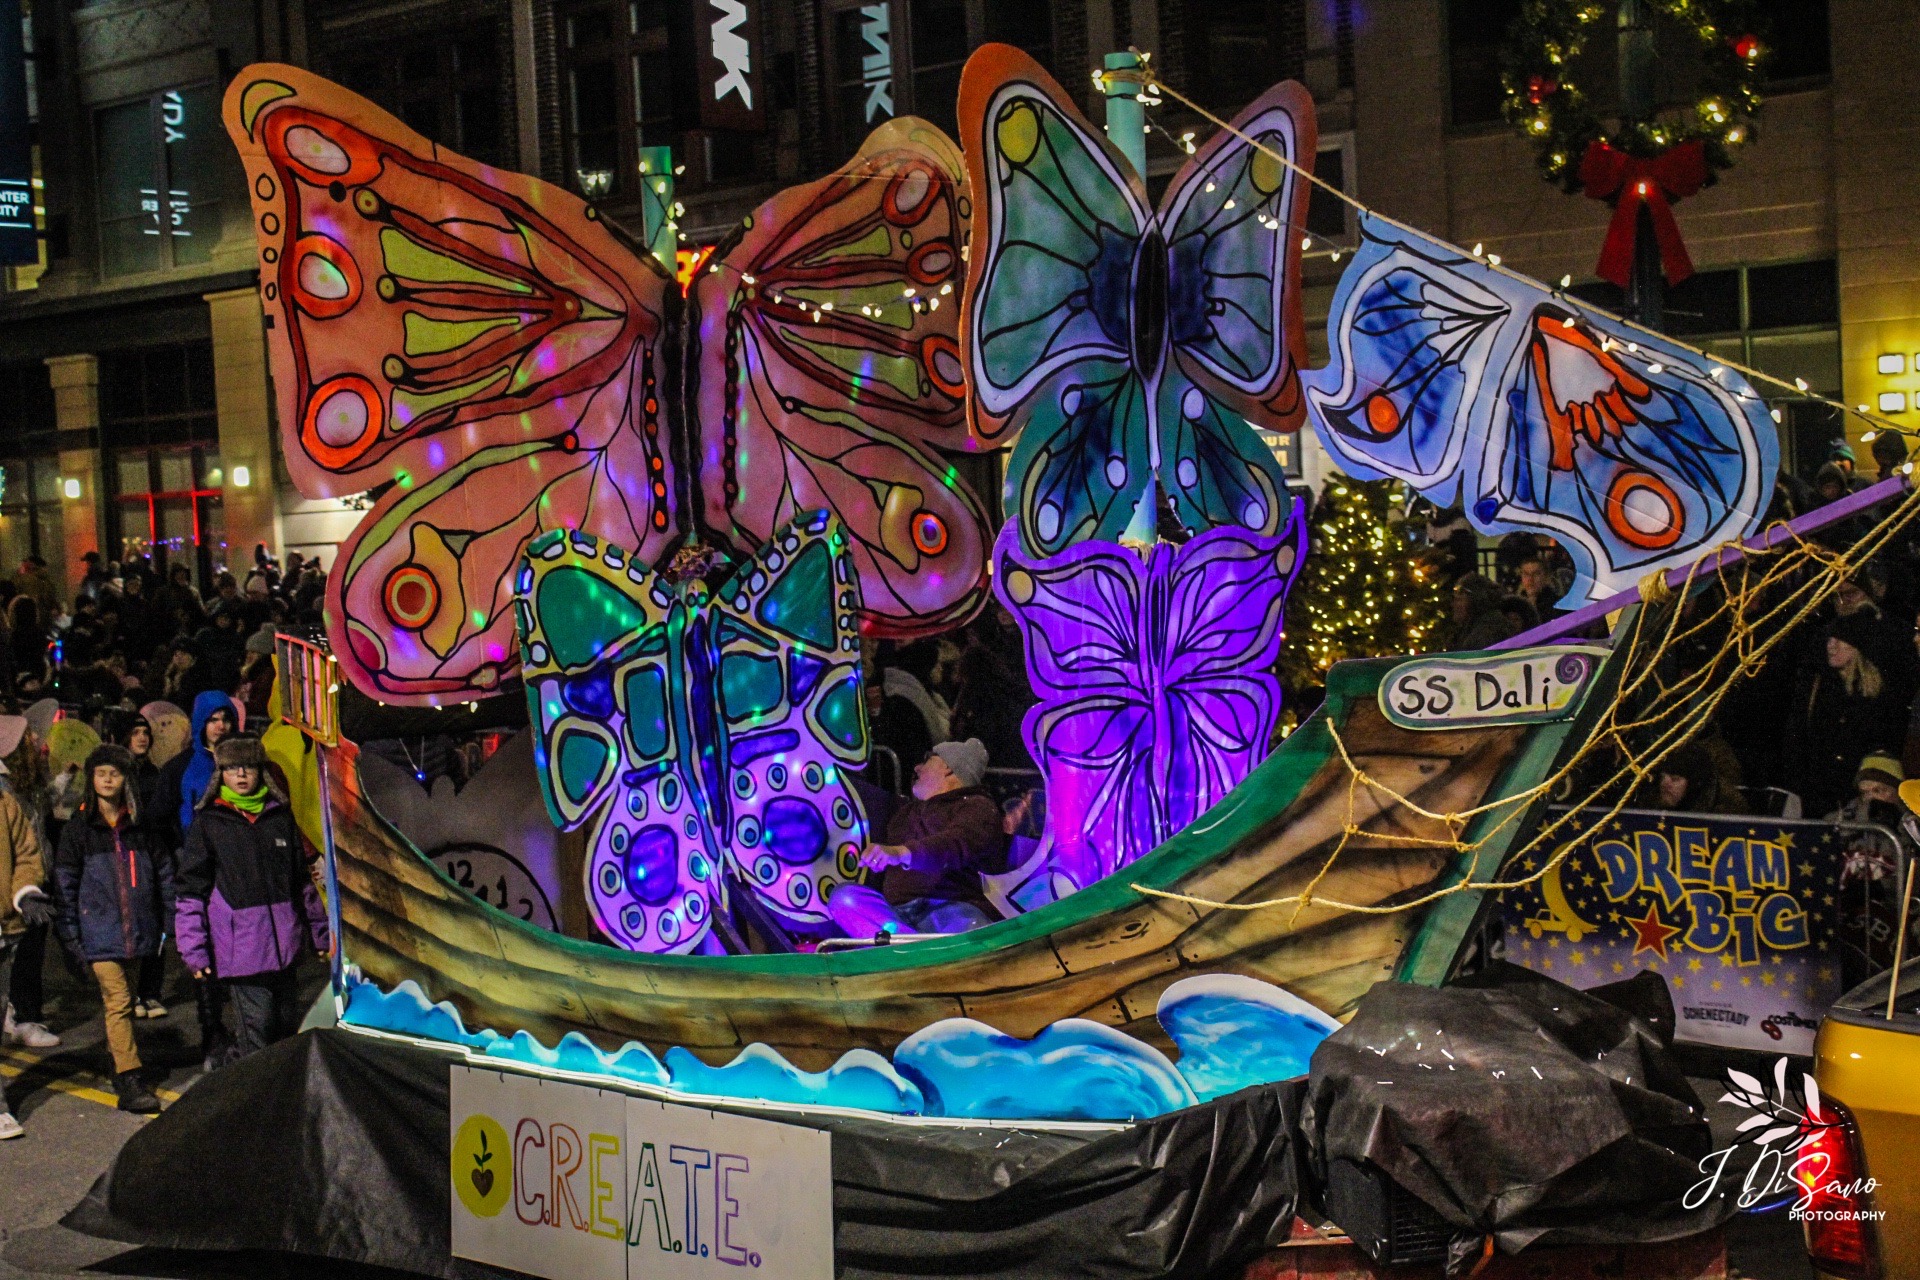 The SS Dali! A colorful float featuring a pirate ship, brightly colored butterflies, and LED lights. Designed and built by C.R.E.A.T.E. Community Studios.